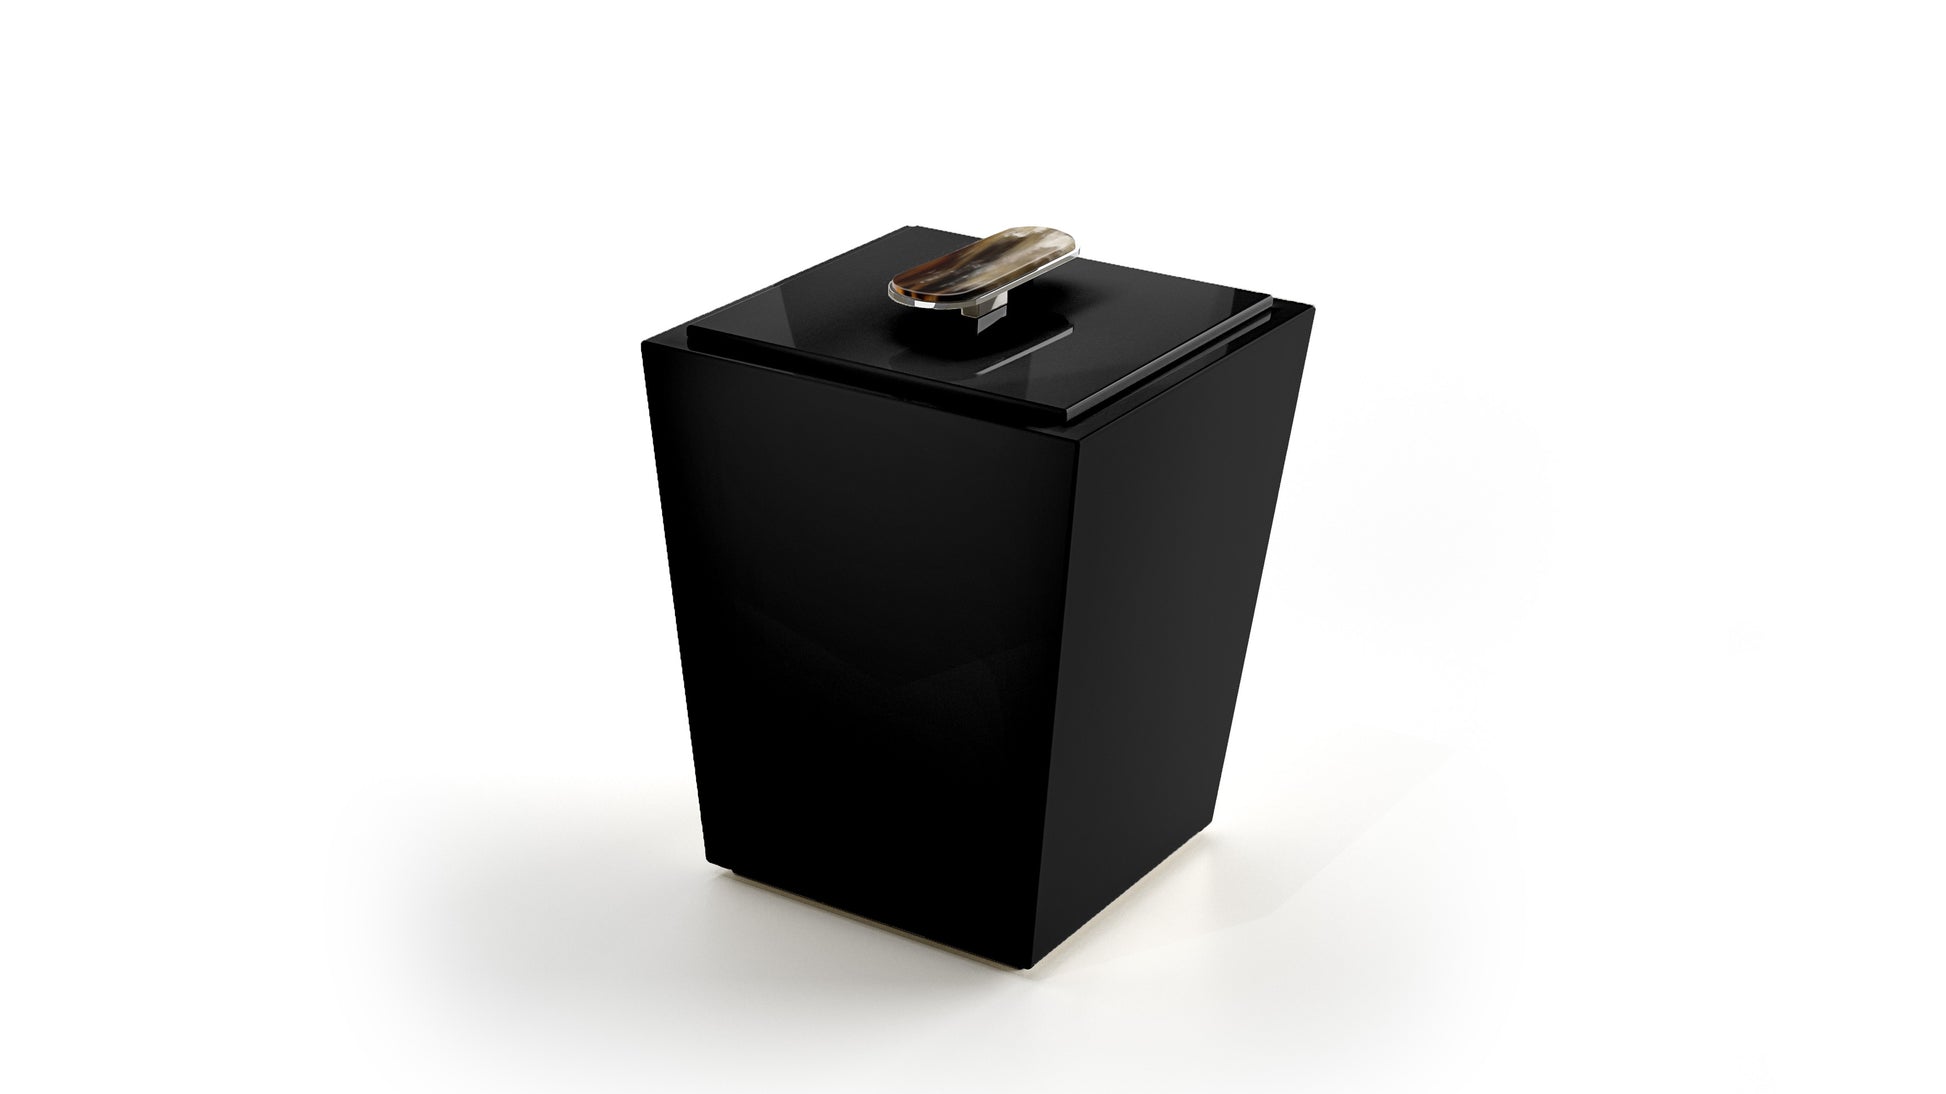 Arcahorn Bicco Waste Paper Basket | Lacquered Black Gloss Finish | Horn Handle and Chromed Brass Lid | Ideal for Yacht Decor | Explore Luxury Home Accessories at 2Jour Concierge, #1 luxury high-end gift & lifestyle shop